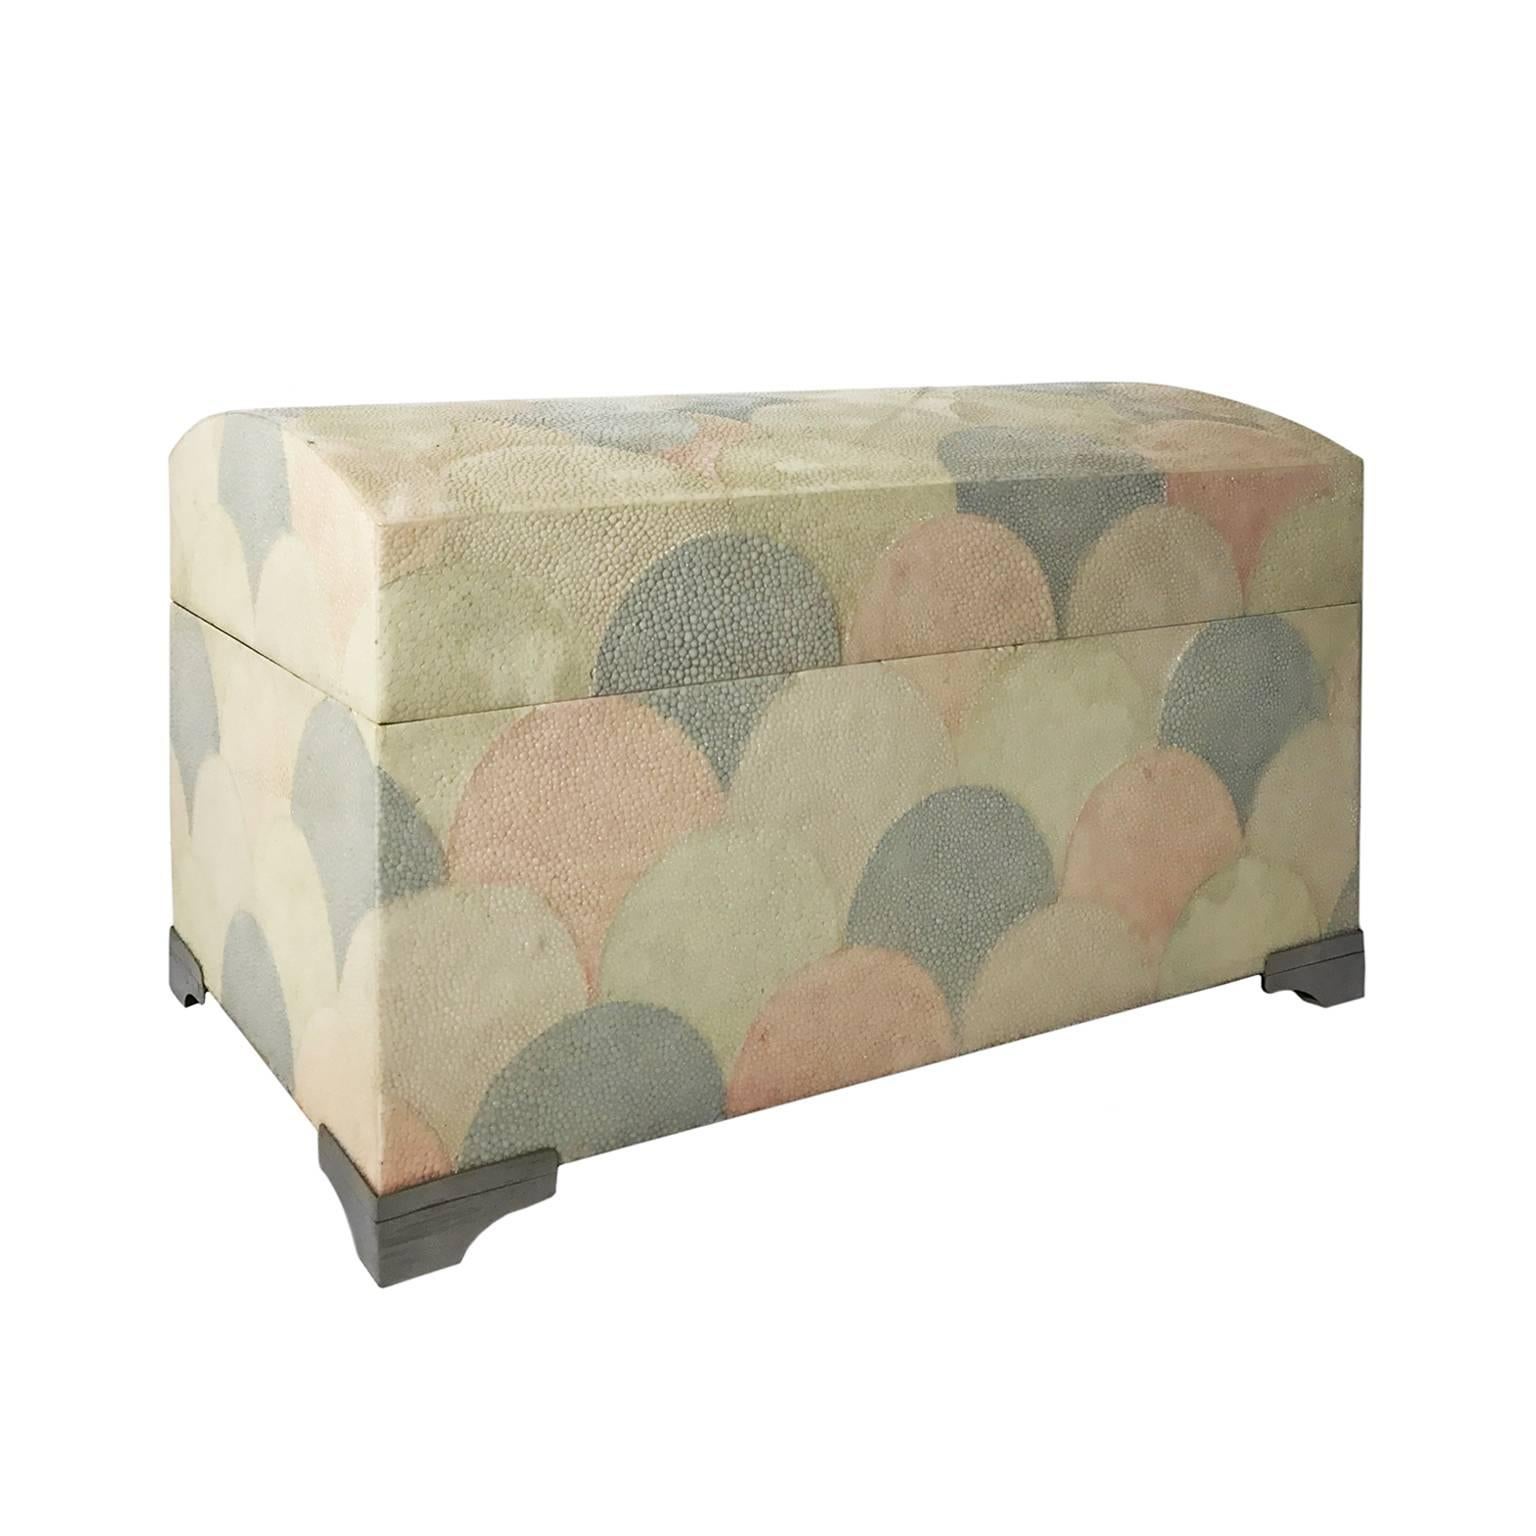 1970's Maitland-Smith scalloped shagreen box with vaulted lid and nickel feet.